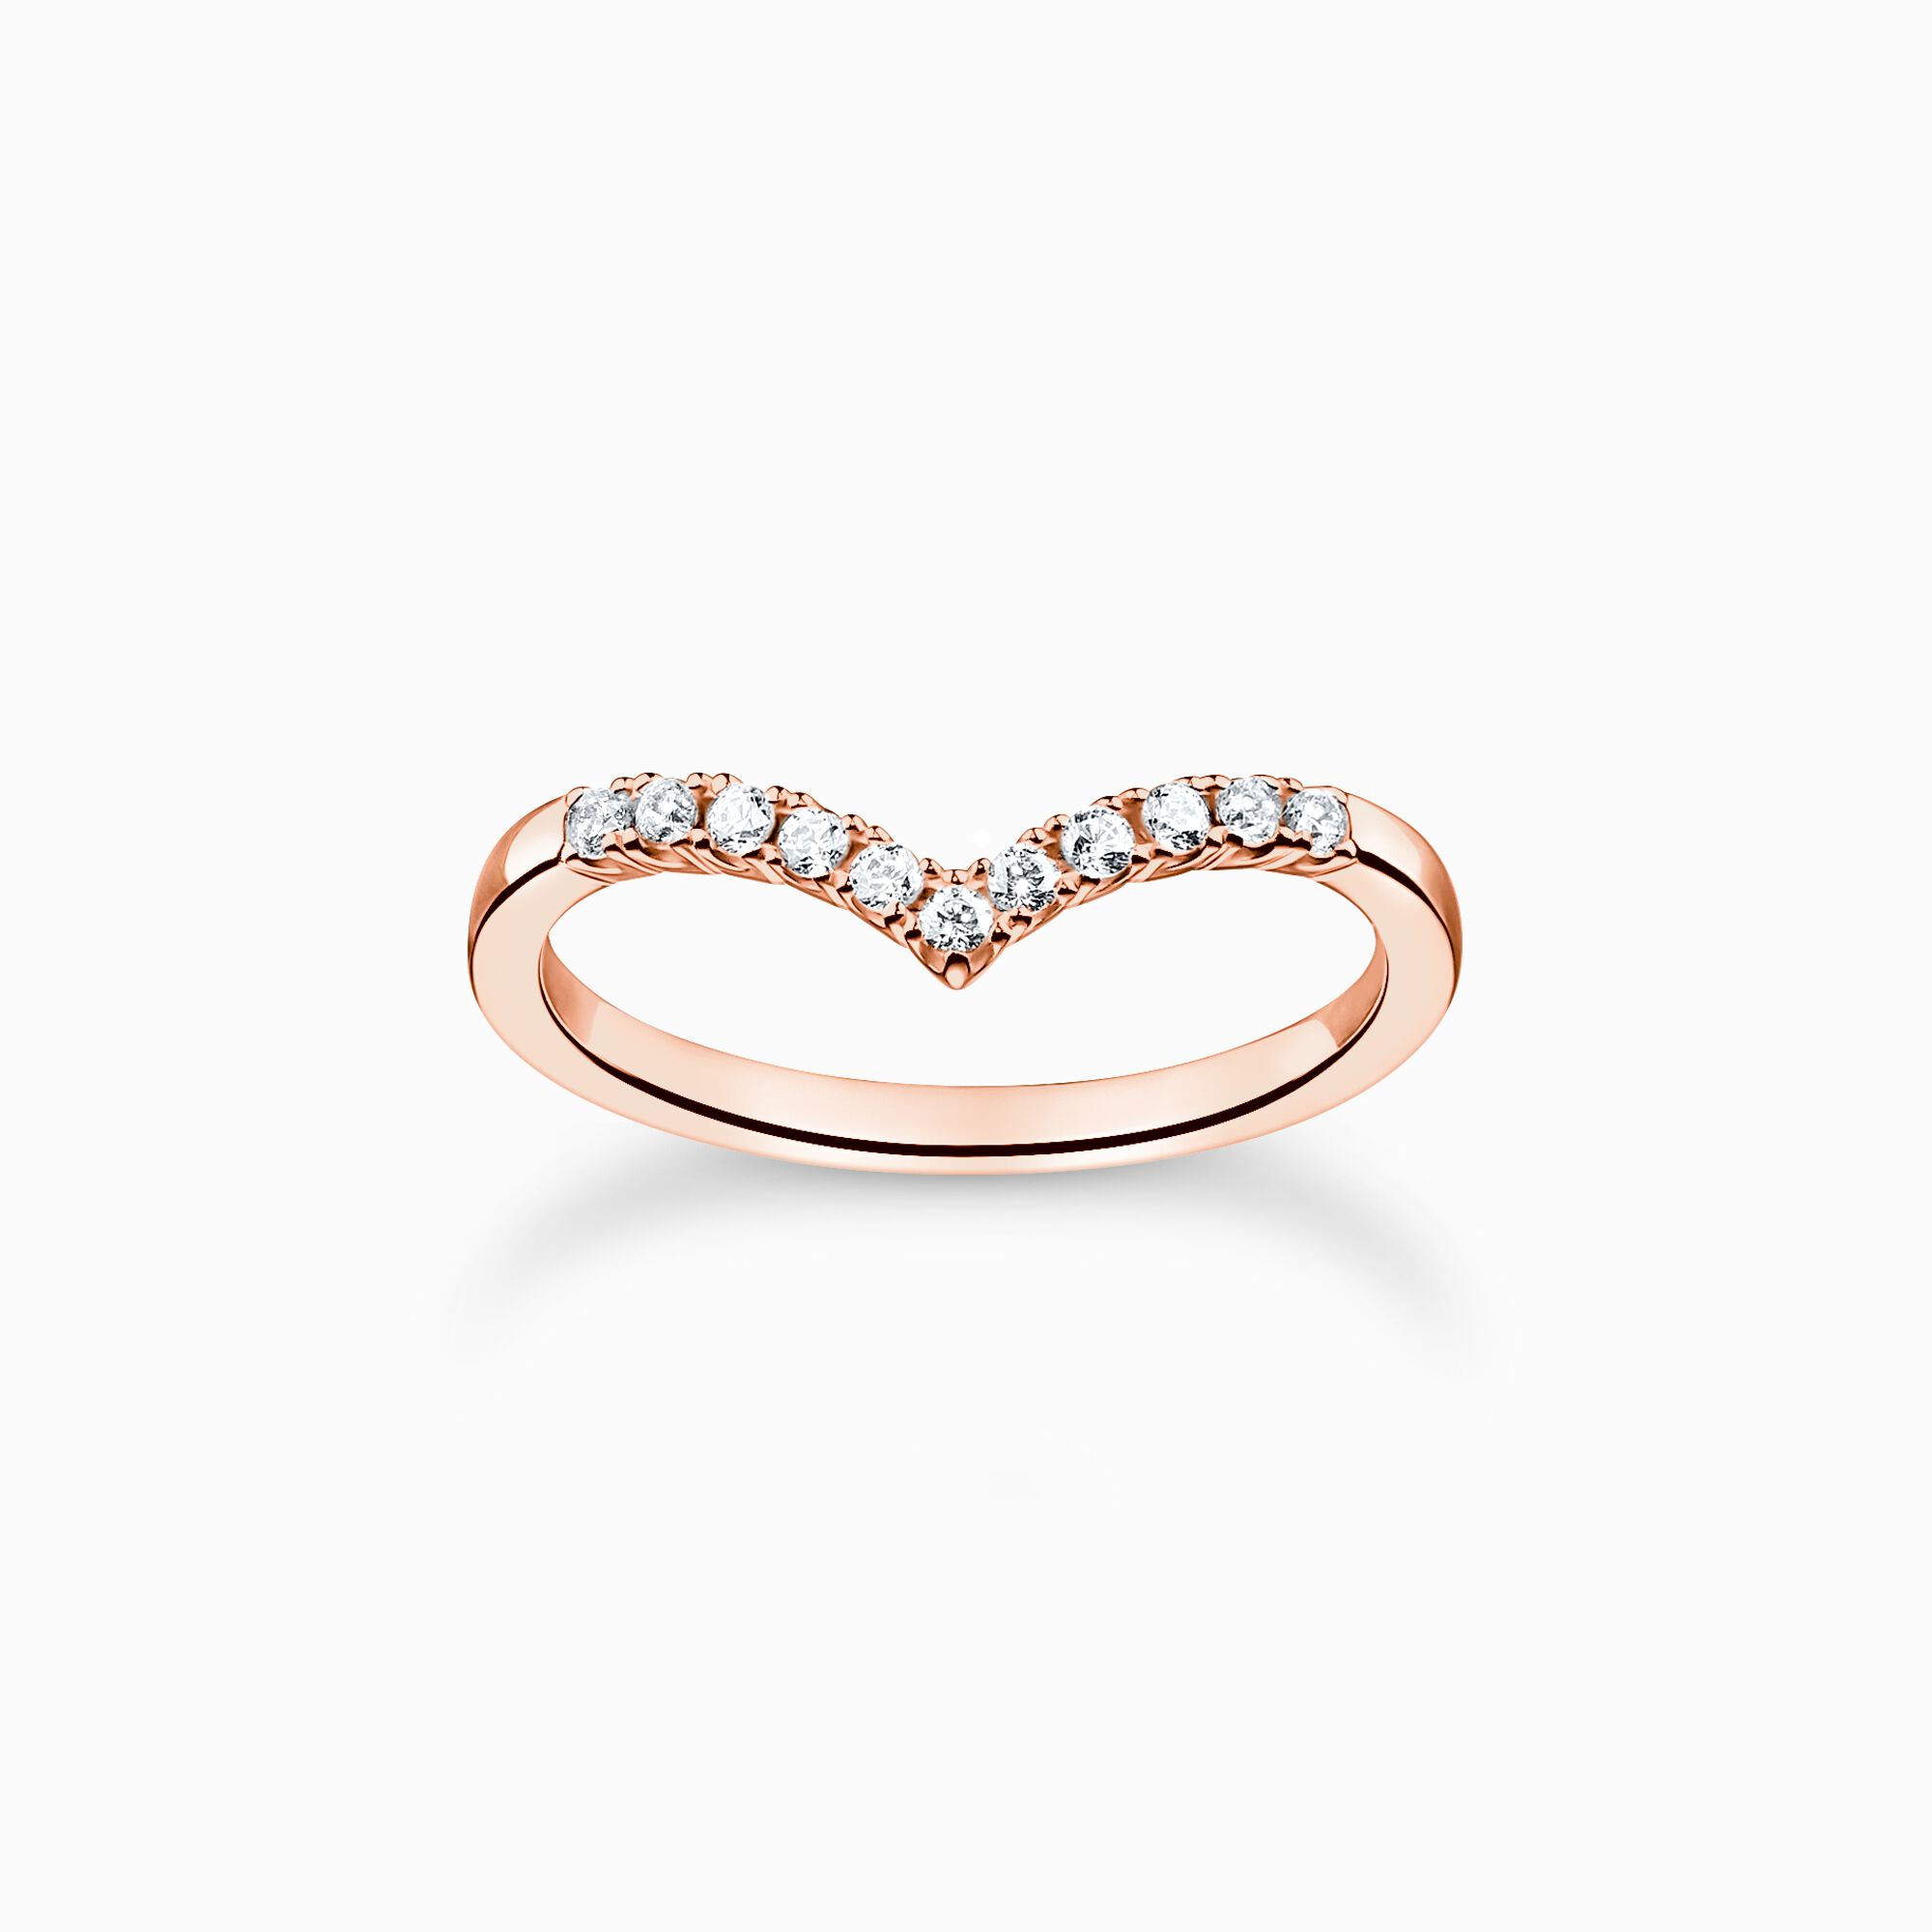 Ring V-shape with white stones rose gold from the Charming Collection collection in the THOMAS SABO online store